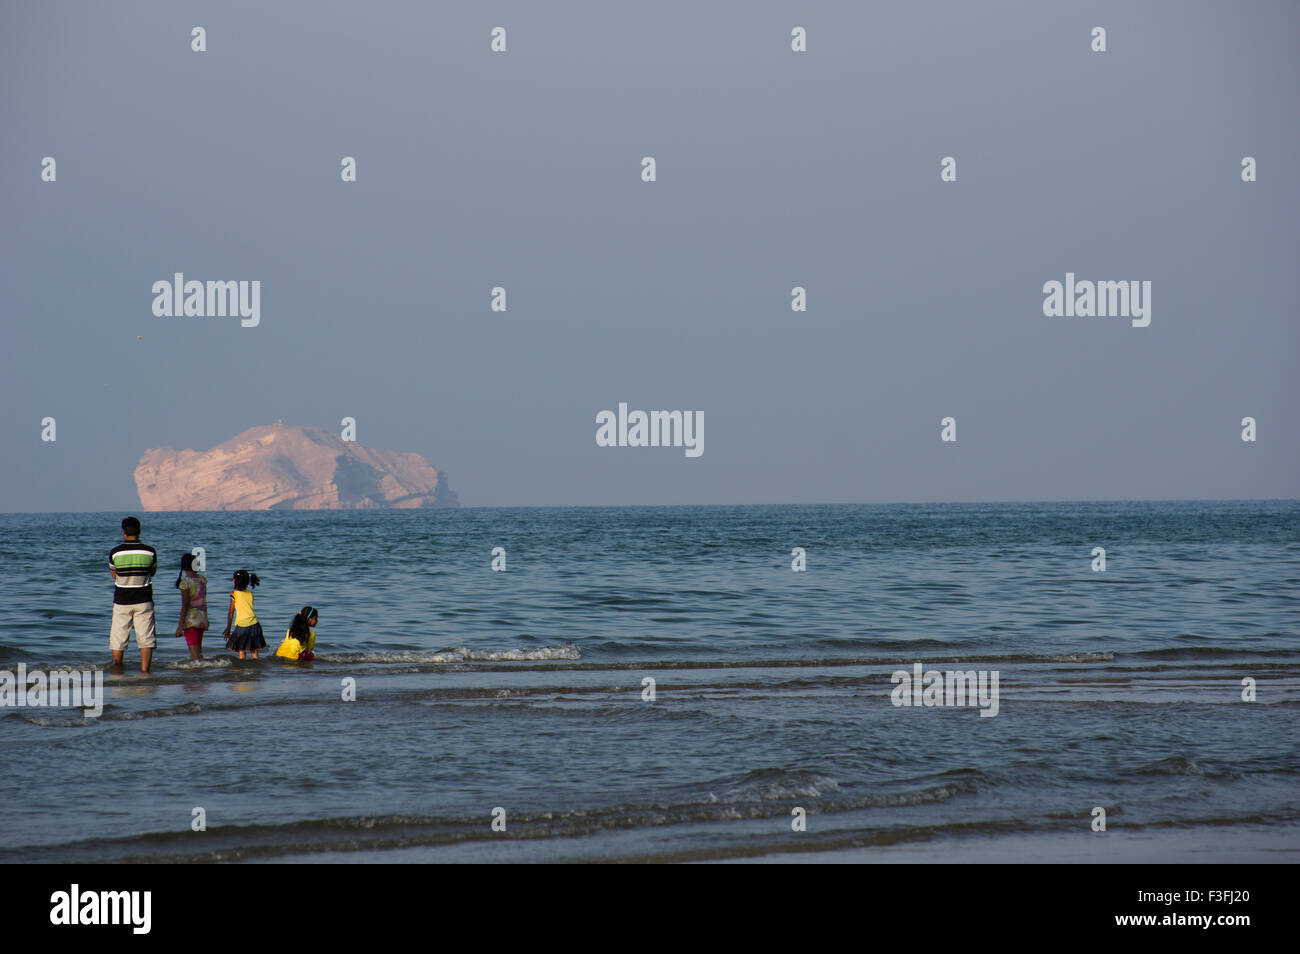 A family looks out across the Gulf of Oman in Muscat in the Sultanate of Oman, a safe, friendly Gulf State holiday destination Stock Photo